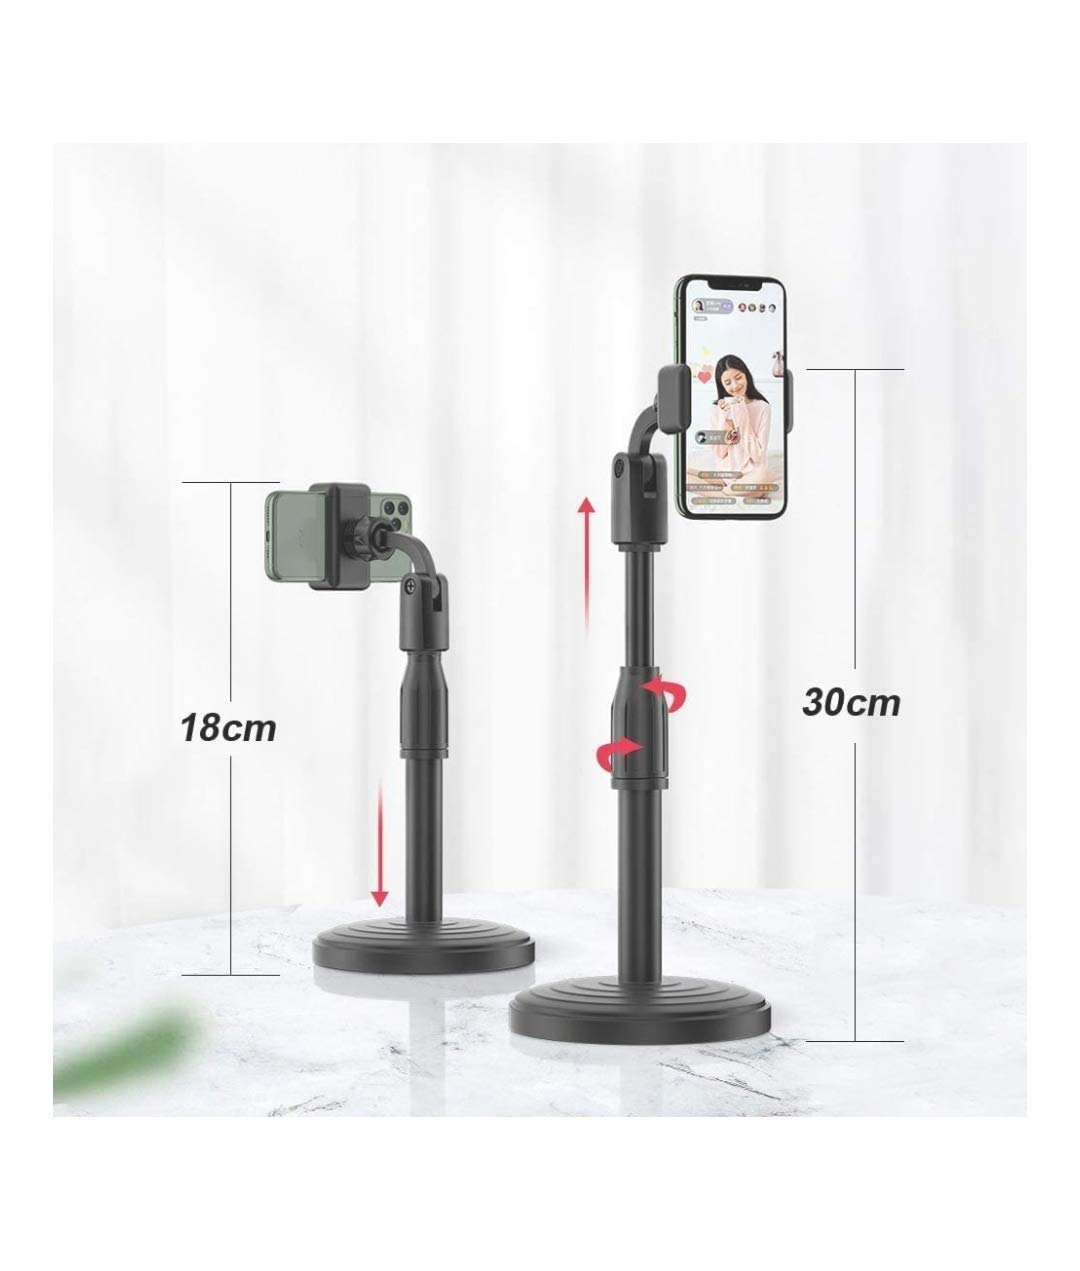 Mobile Phone Stand | Cell Phone Holder Comes with Solid Body/Adjustable Height & 360 Degree Rotate Angle